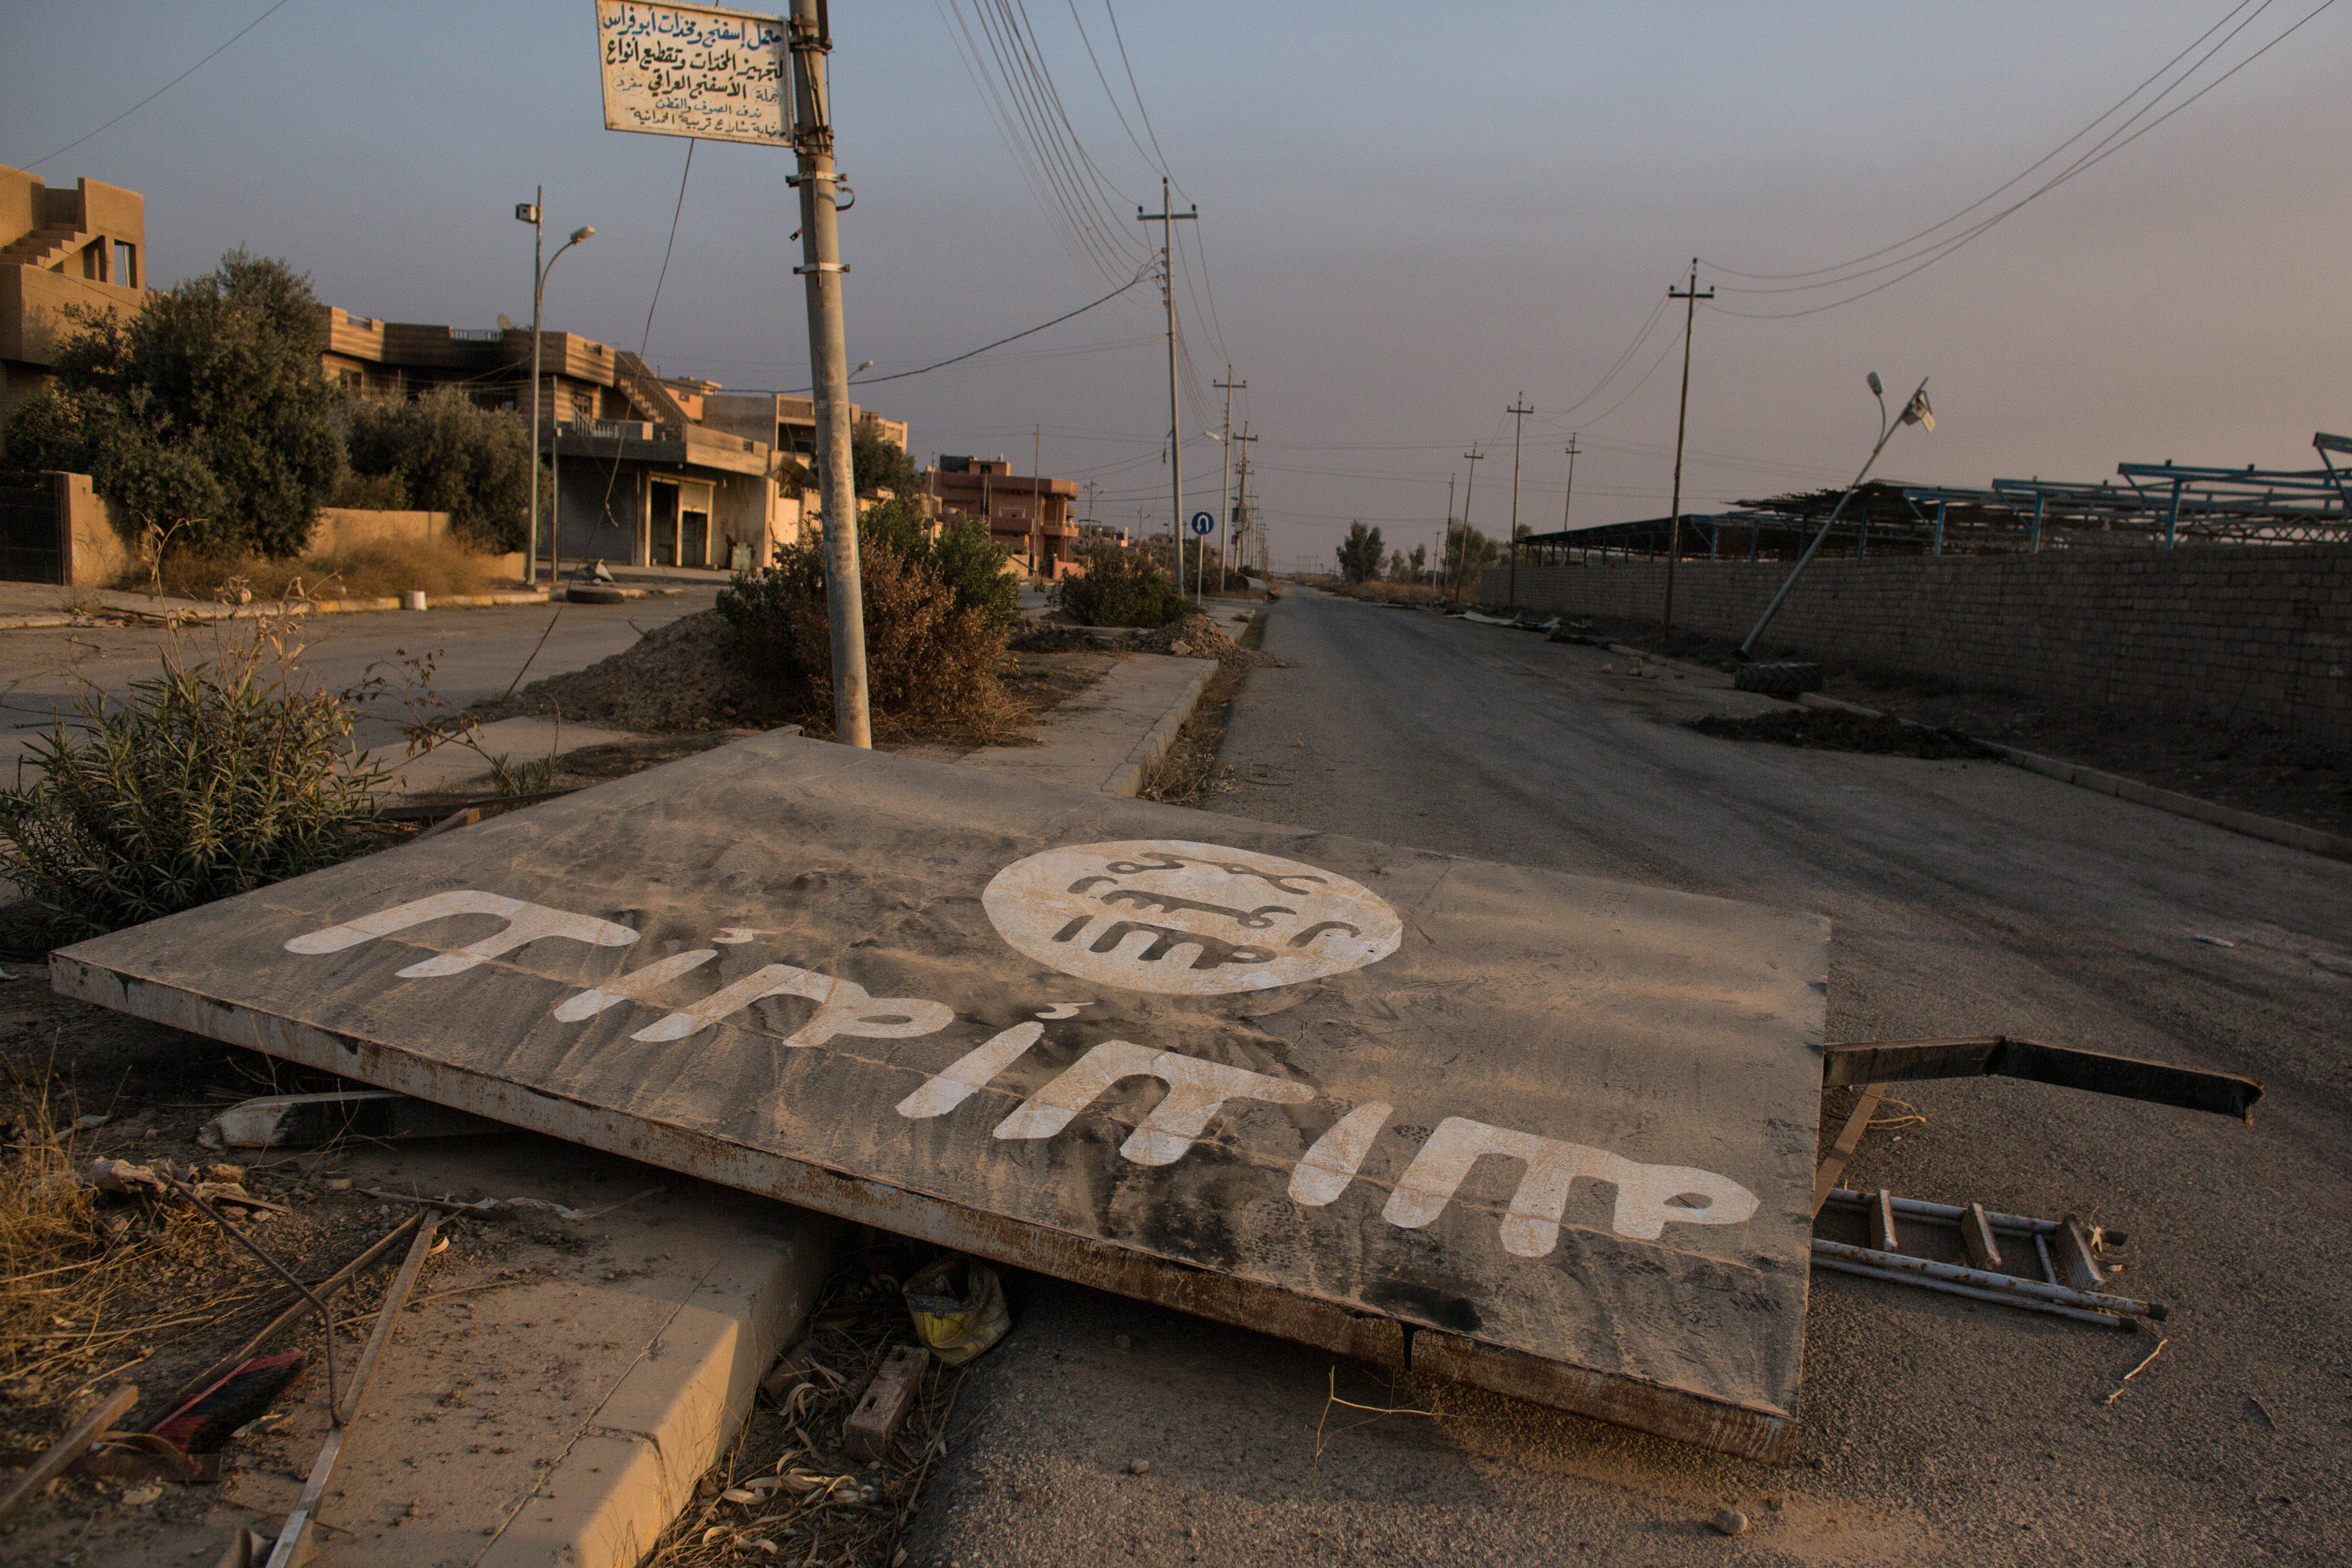 An ISIL billboard is seen destroyed in the middle of the road Qaraqosh, Iraq on Nov. 8, 2016 (Chris McGrath—Getty Images)